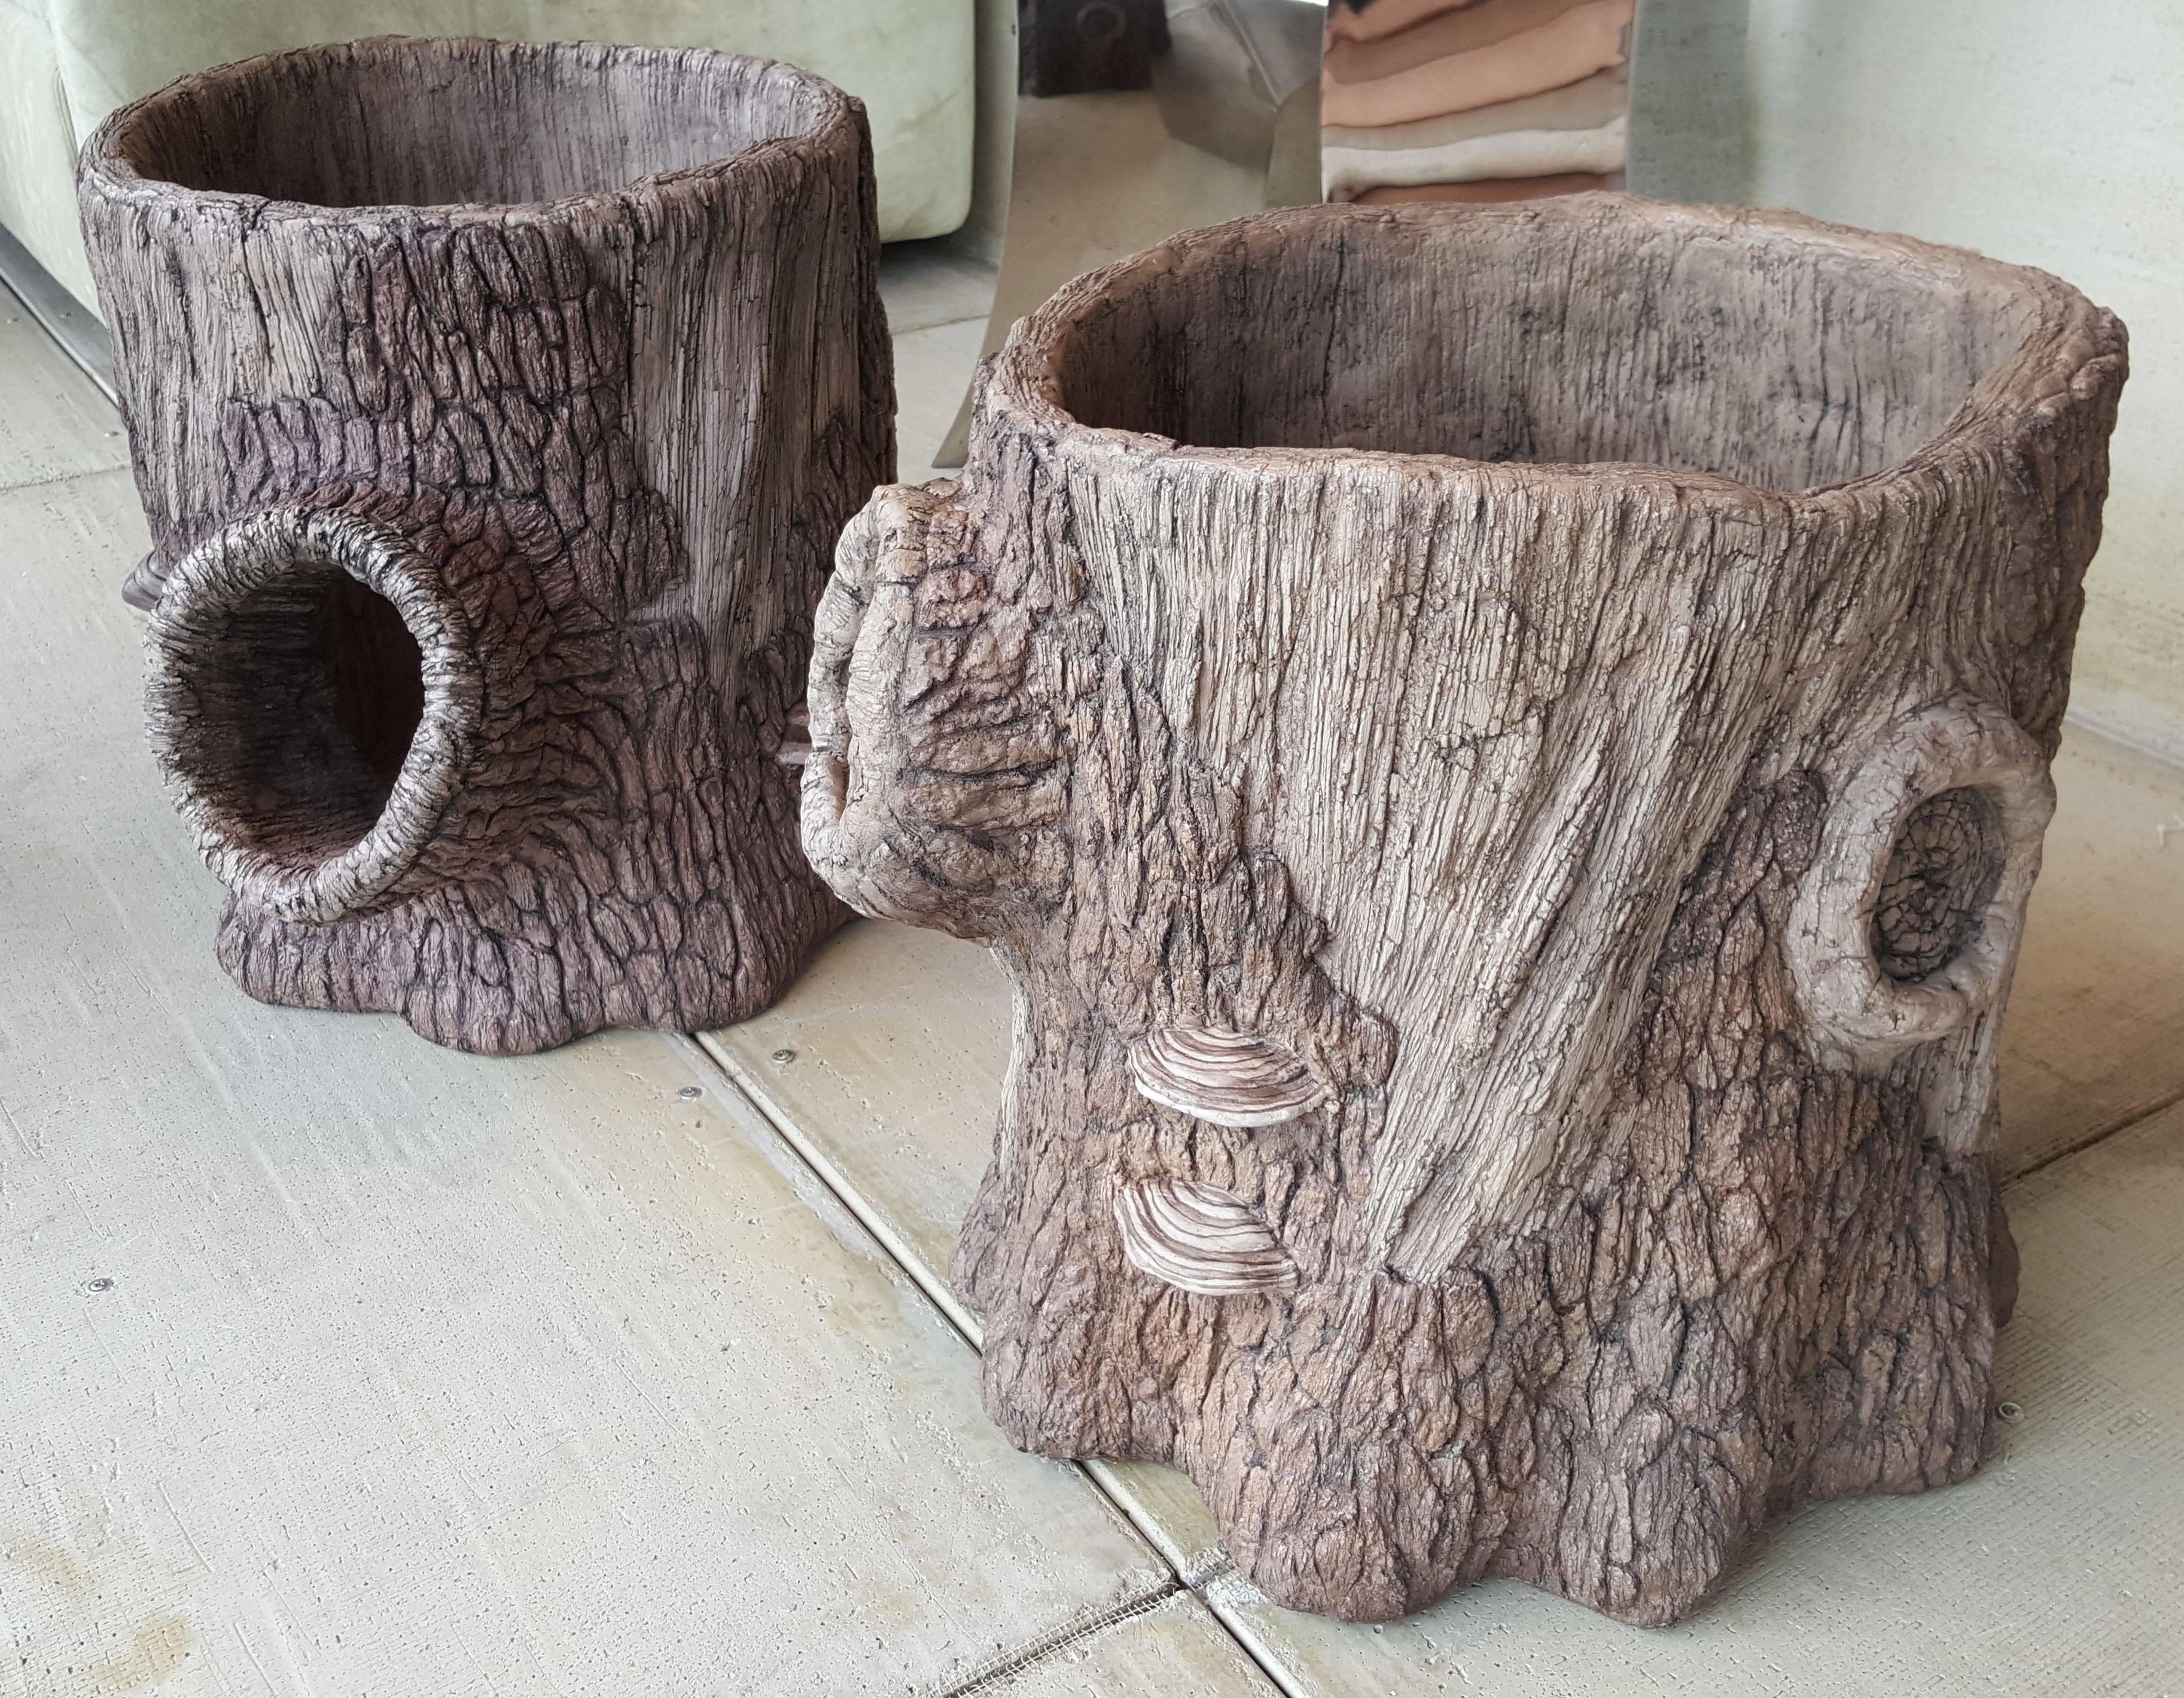 Stunning lifelike pair of Faux Bois planters, these pots are by Diane Husson and were custom-made specifically for our shop. She's worked with concrete companies to create a Frost proof planter which is made to be incredibly long lasting. Each pot